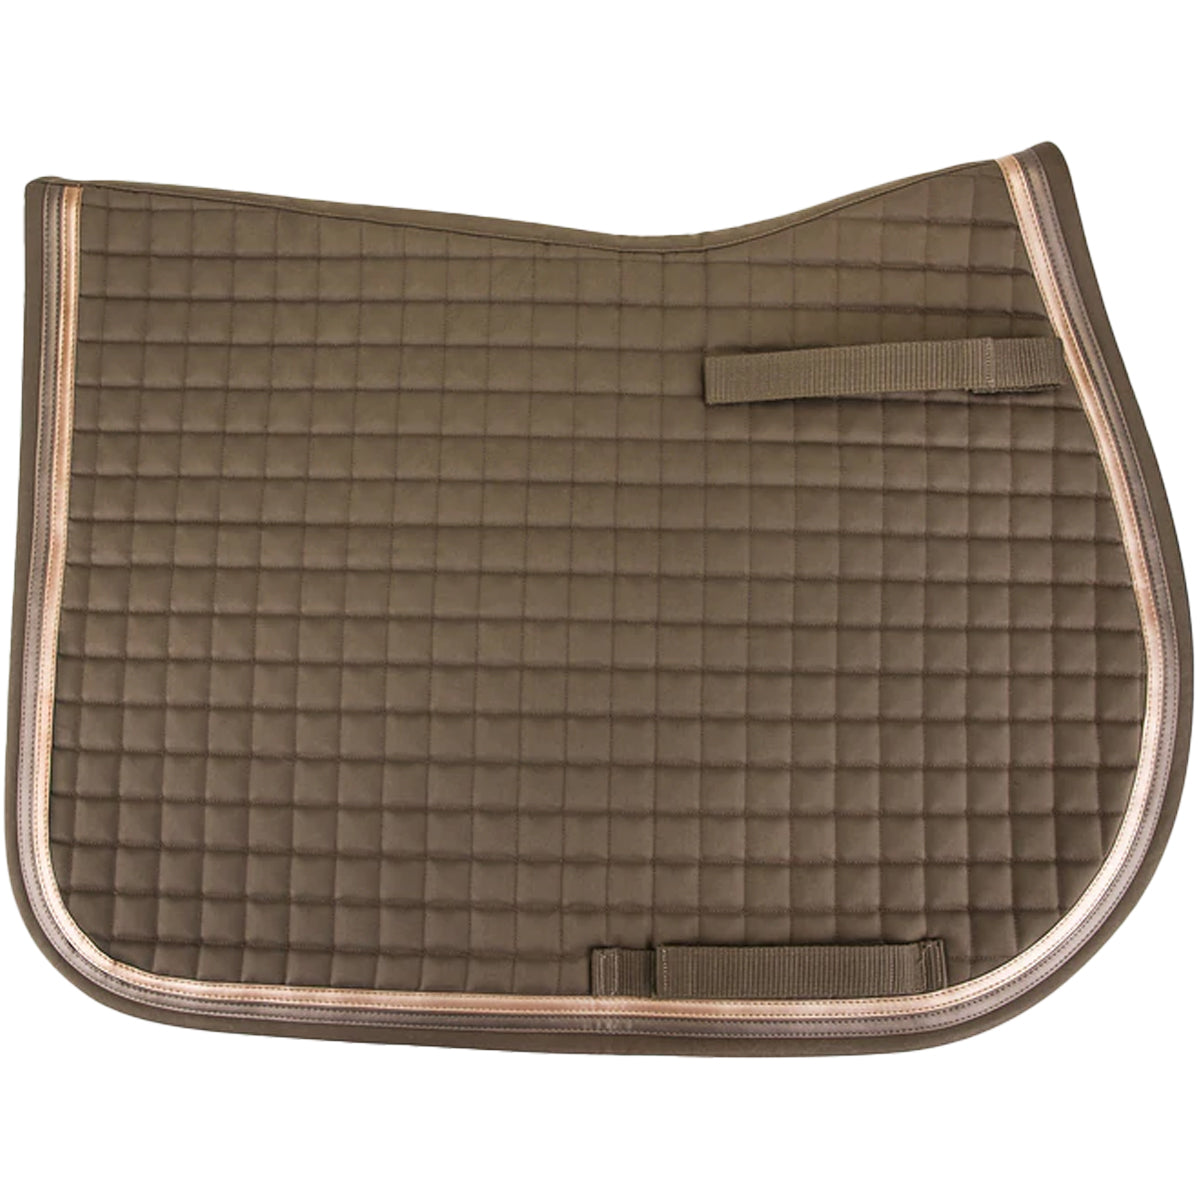 Equine Couture Matte Pony All Purpose Saddle Pad